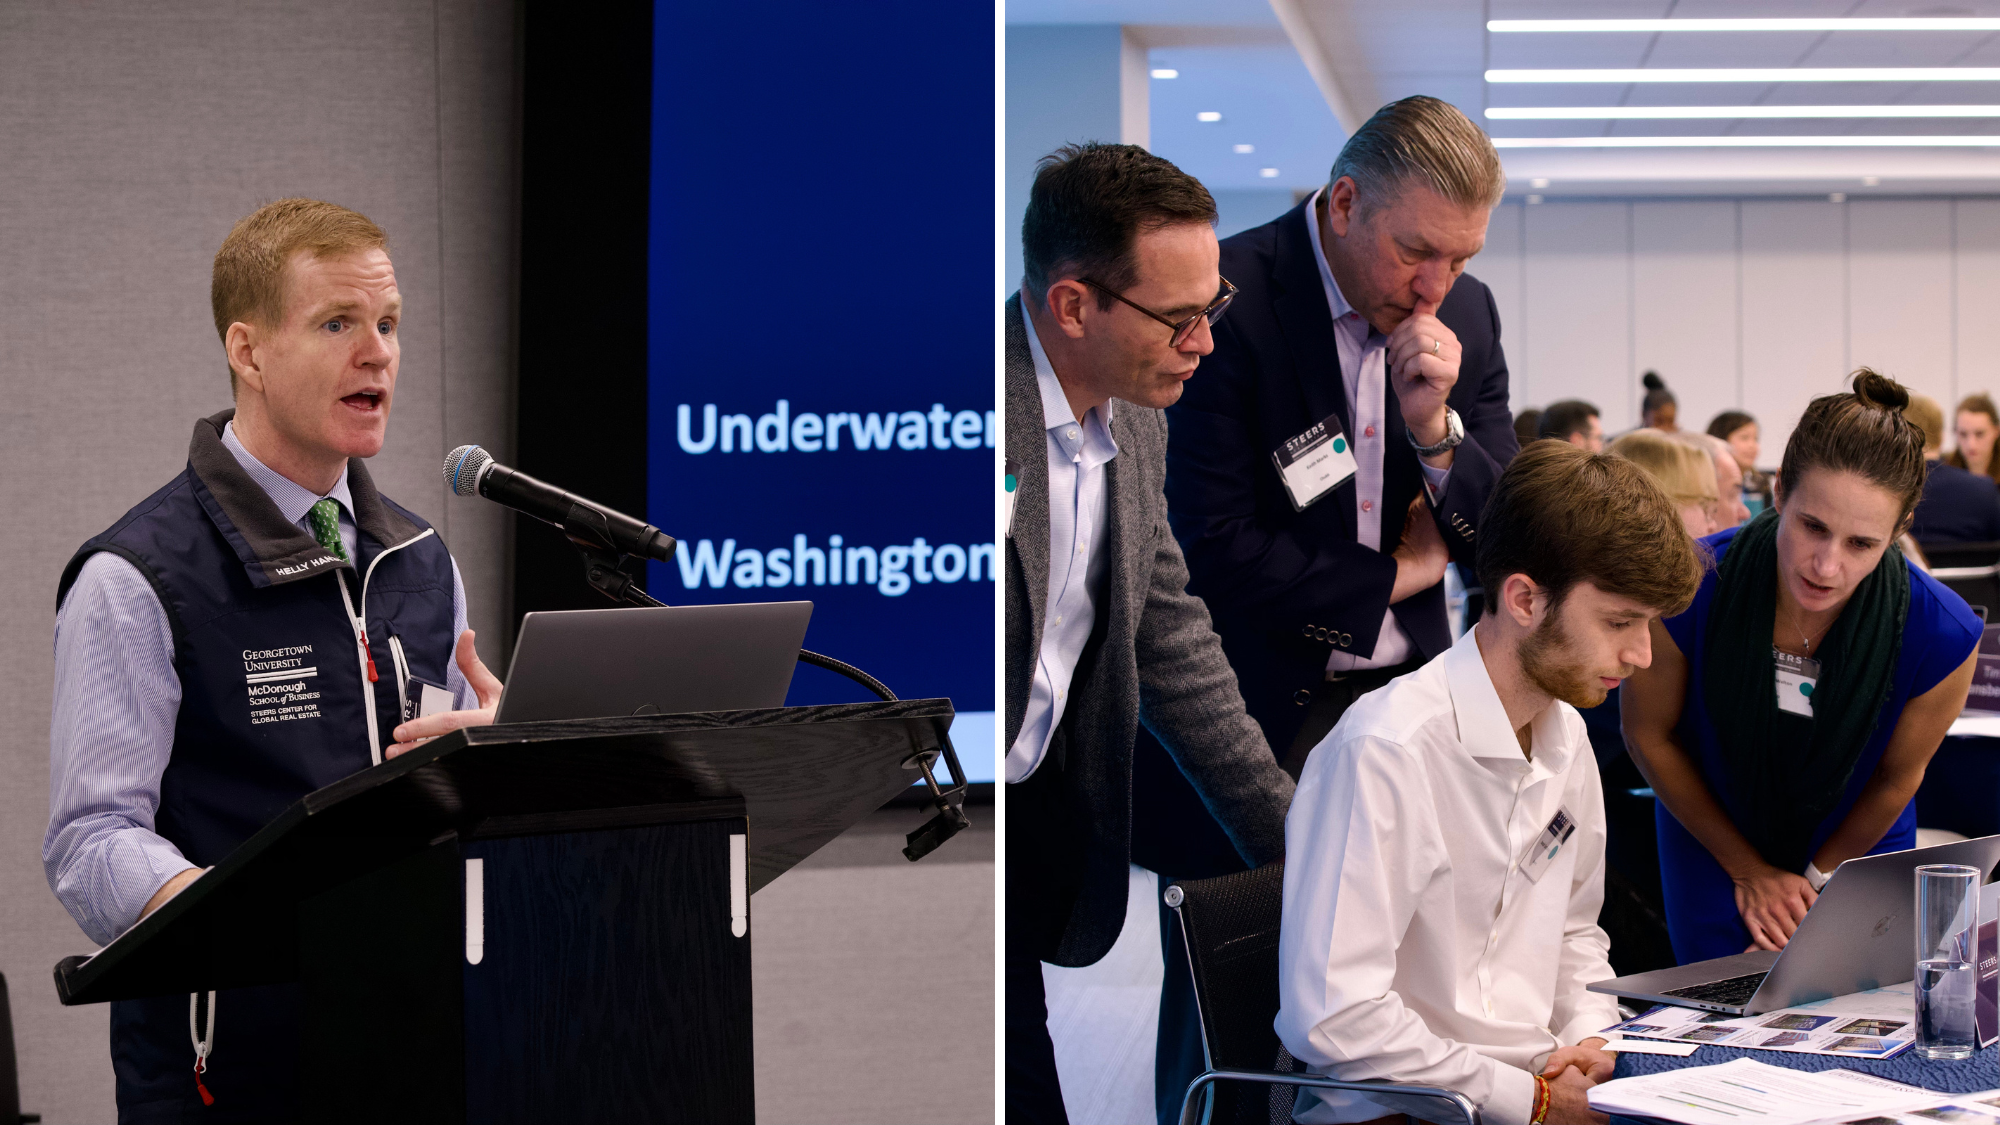 Georgetown's Steers Center for Global Real Estate Convenes Experts to Simulate Climate Change Effects on D.C. Infrastructure